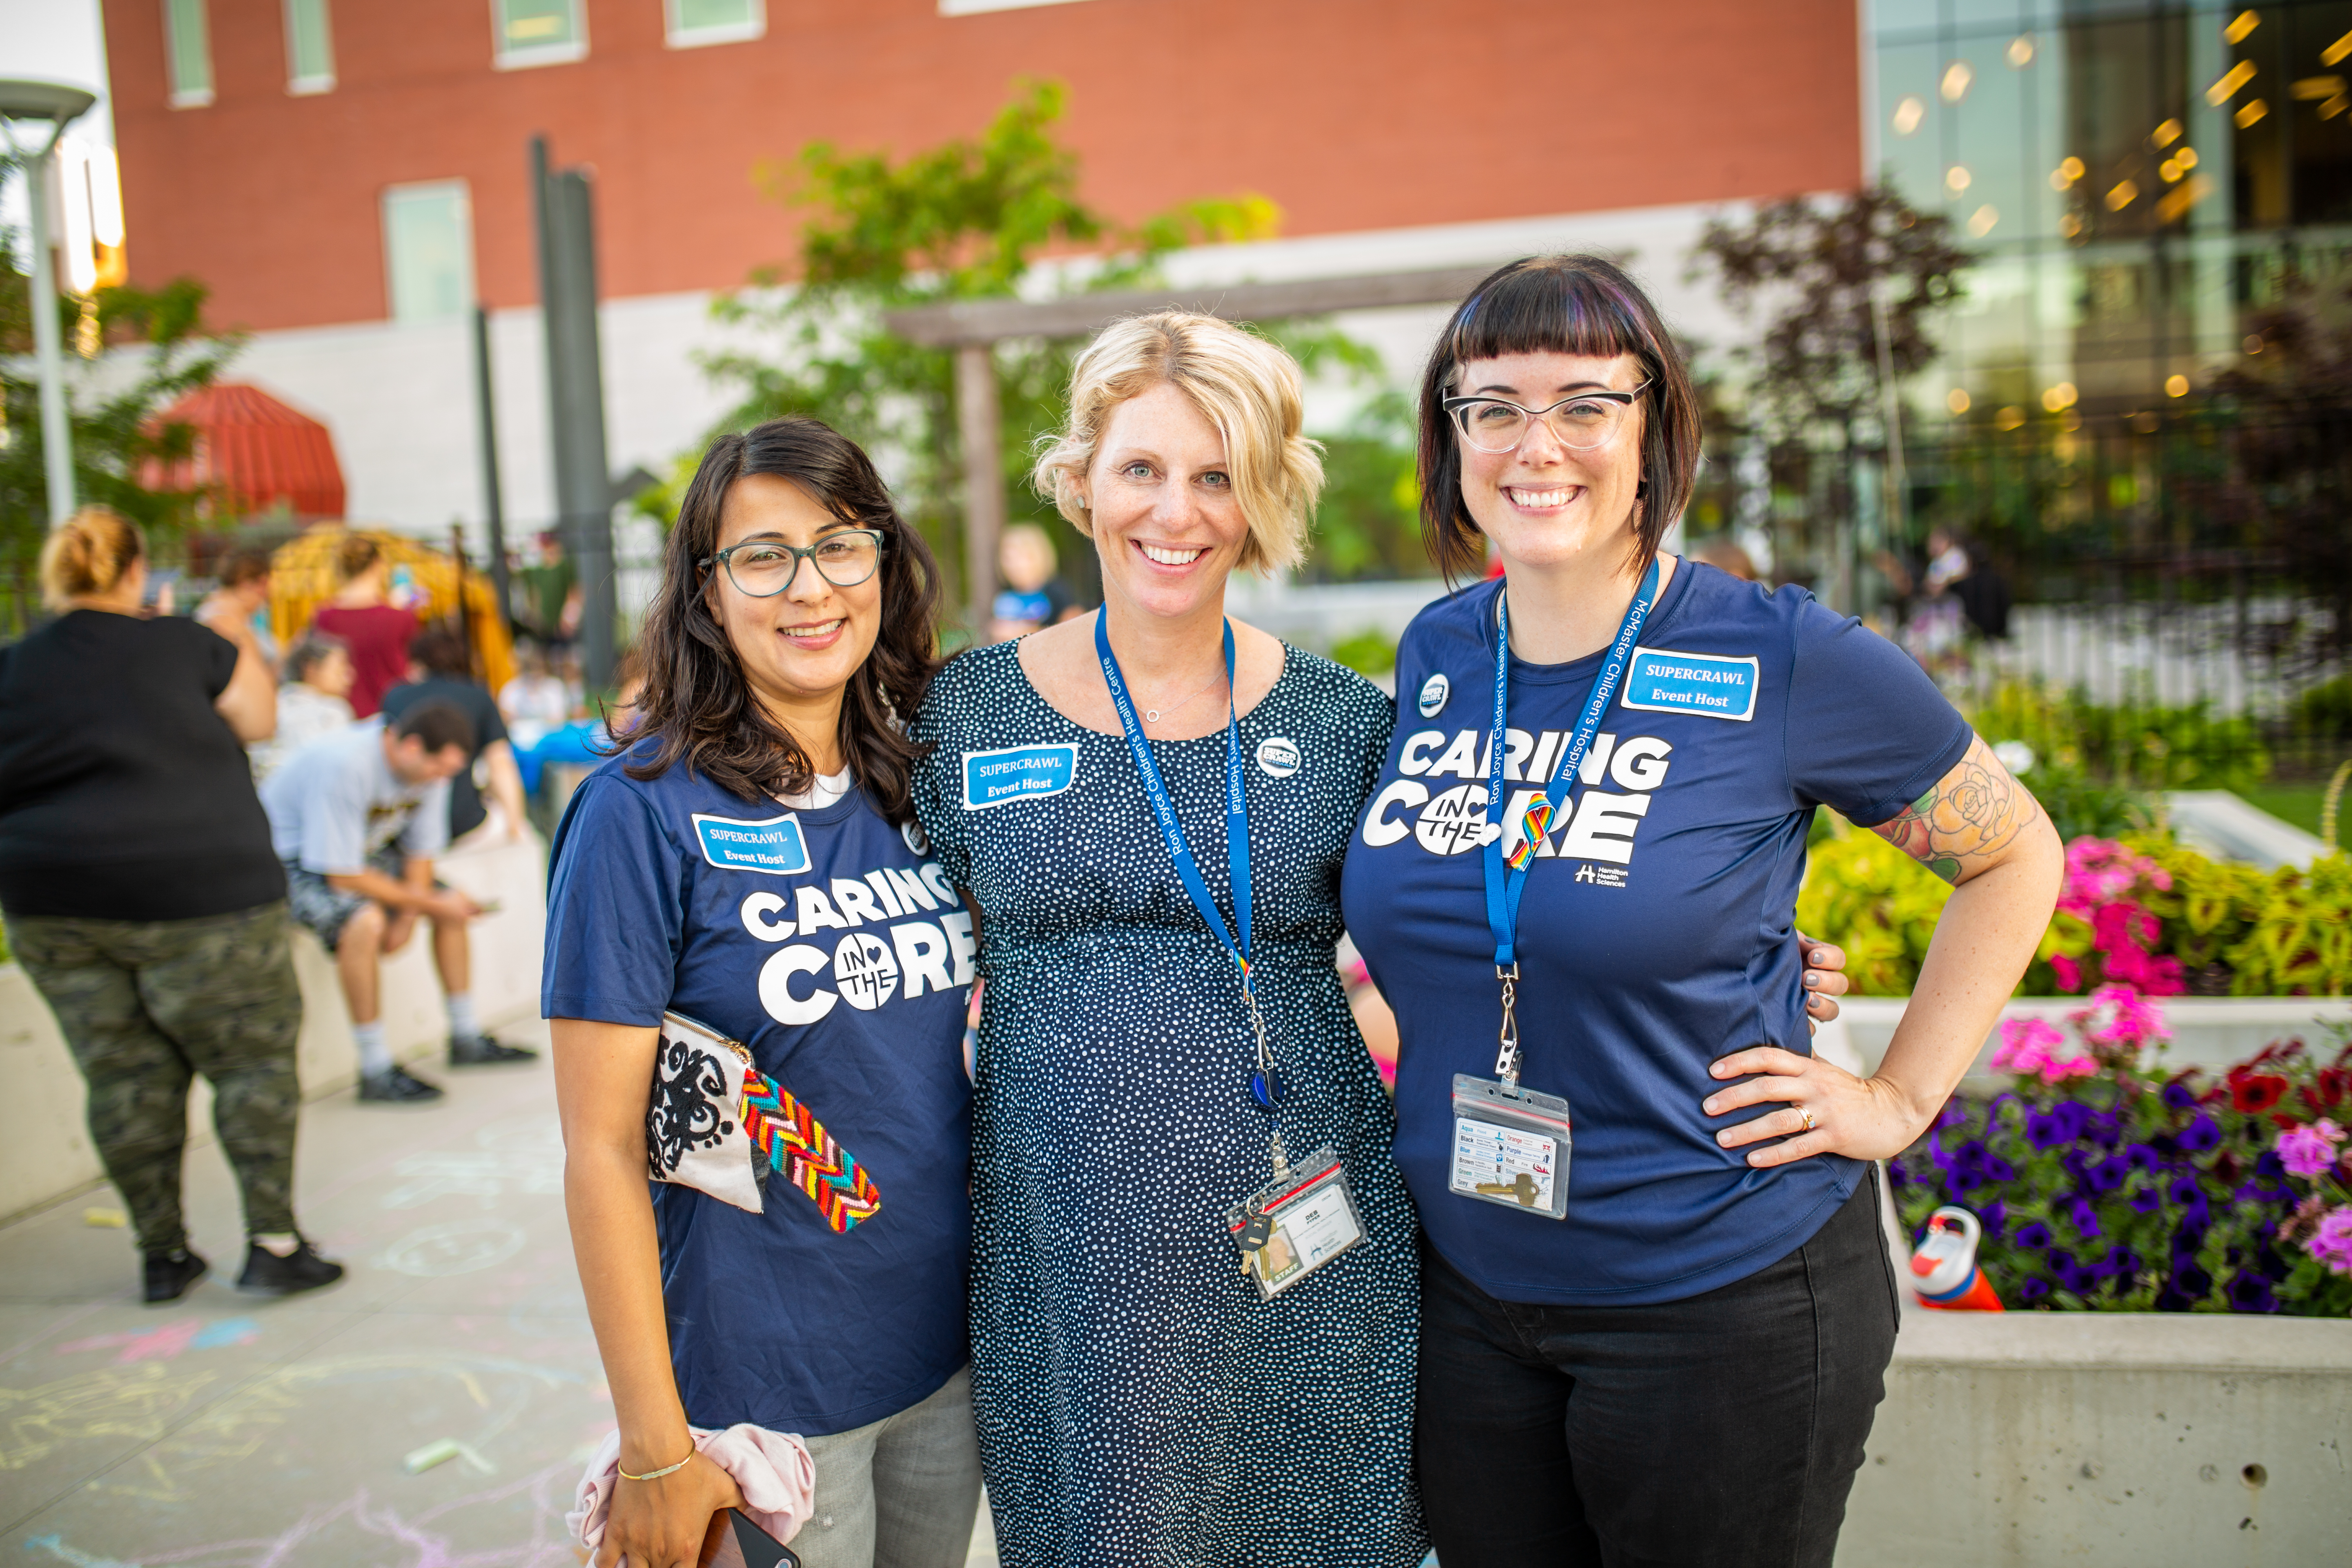 Three RJCHC staff members smile for the camera